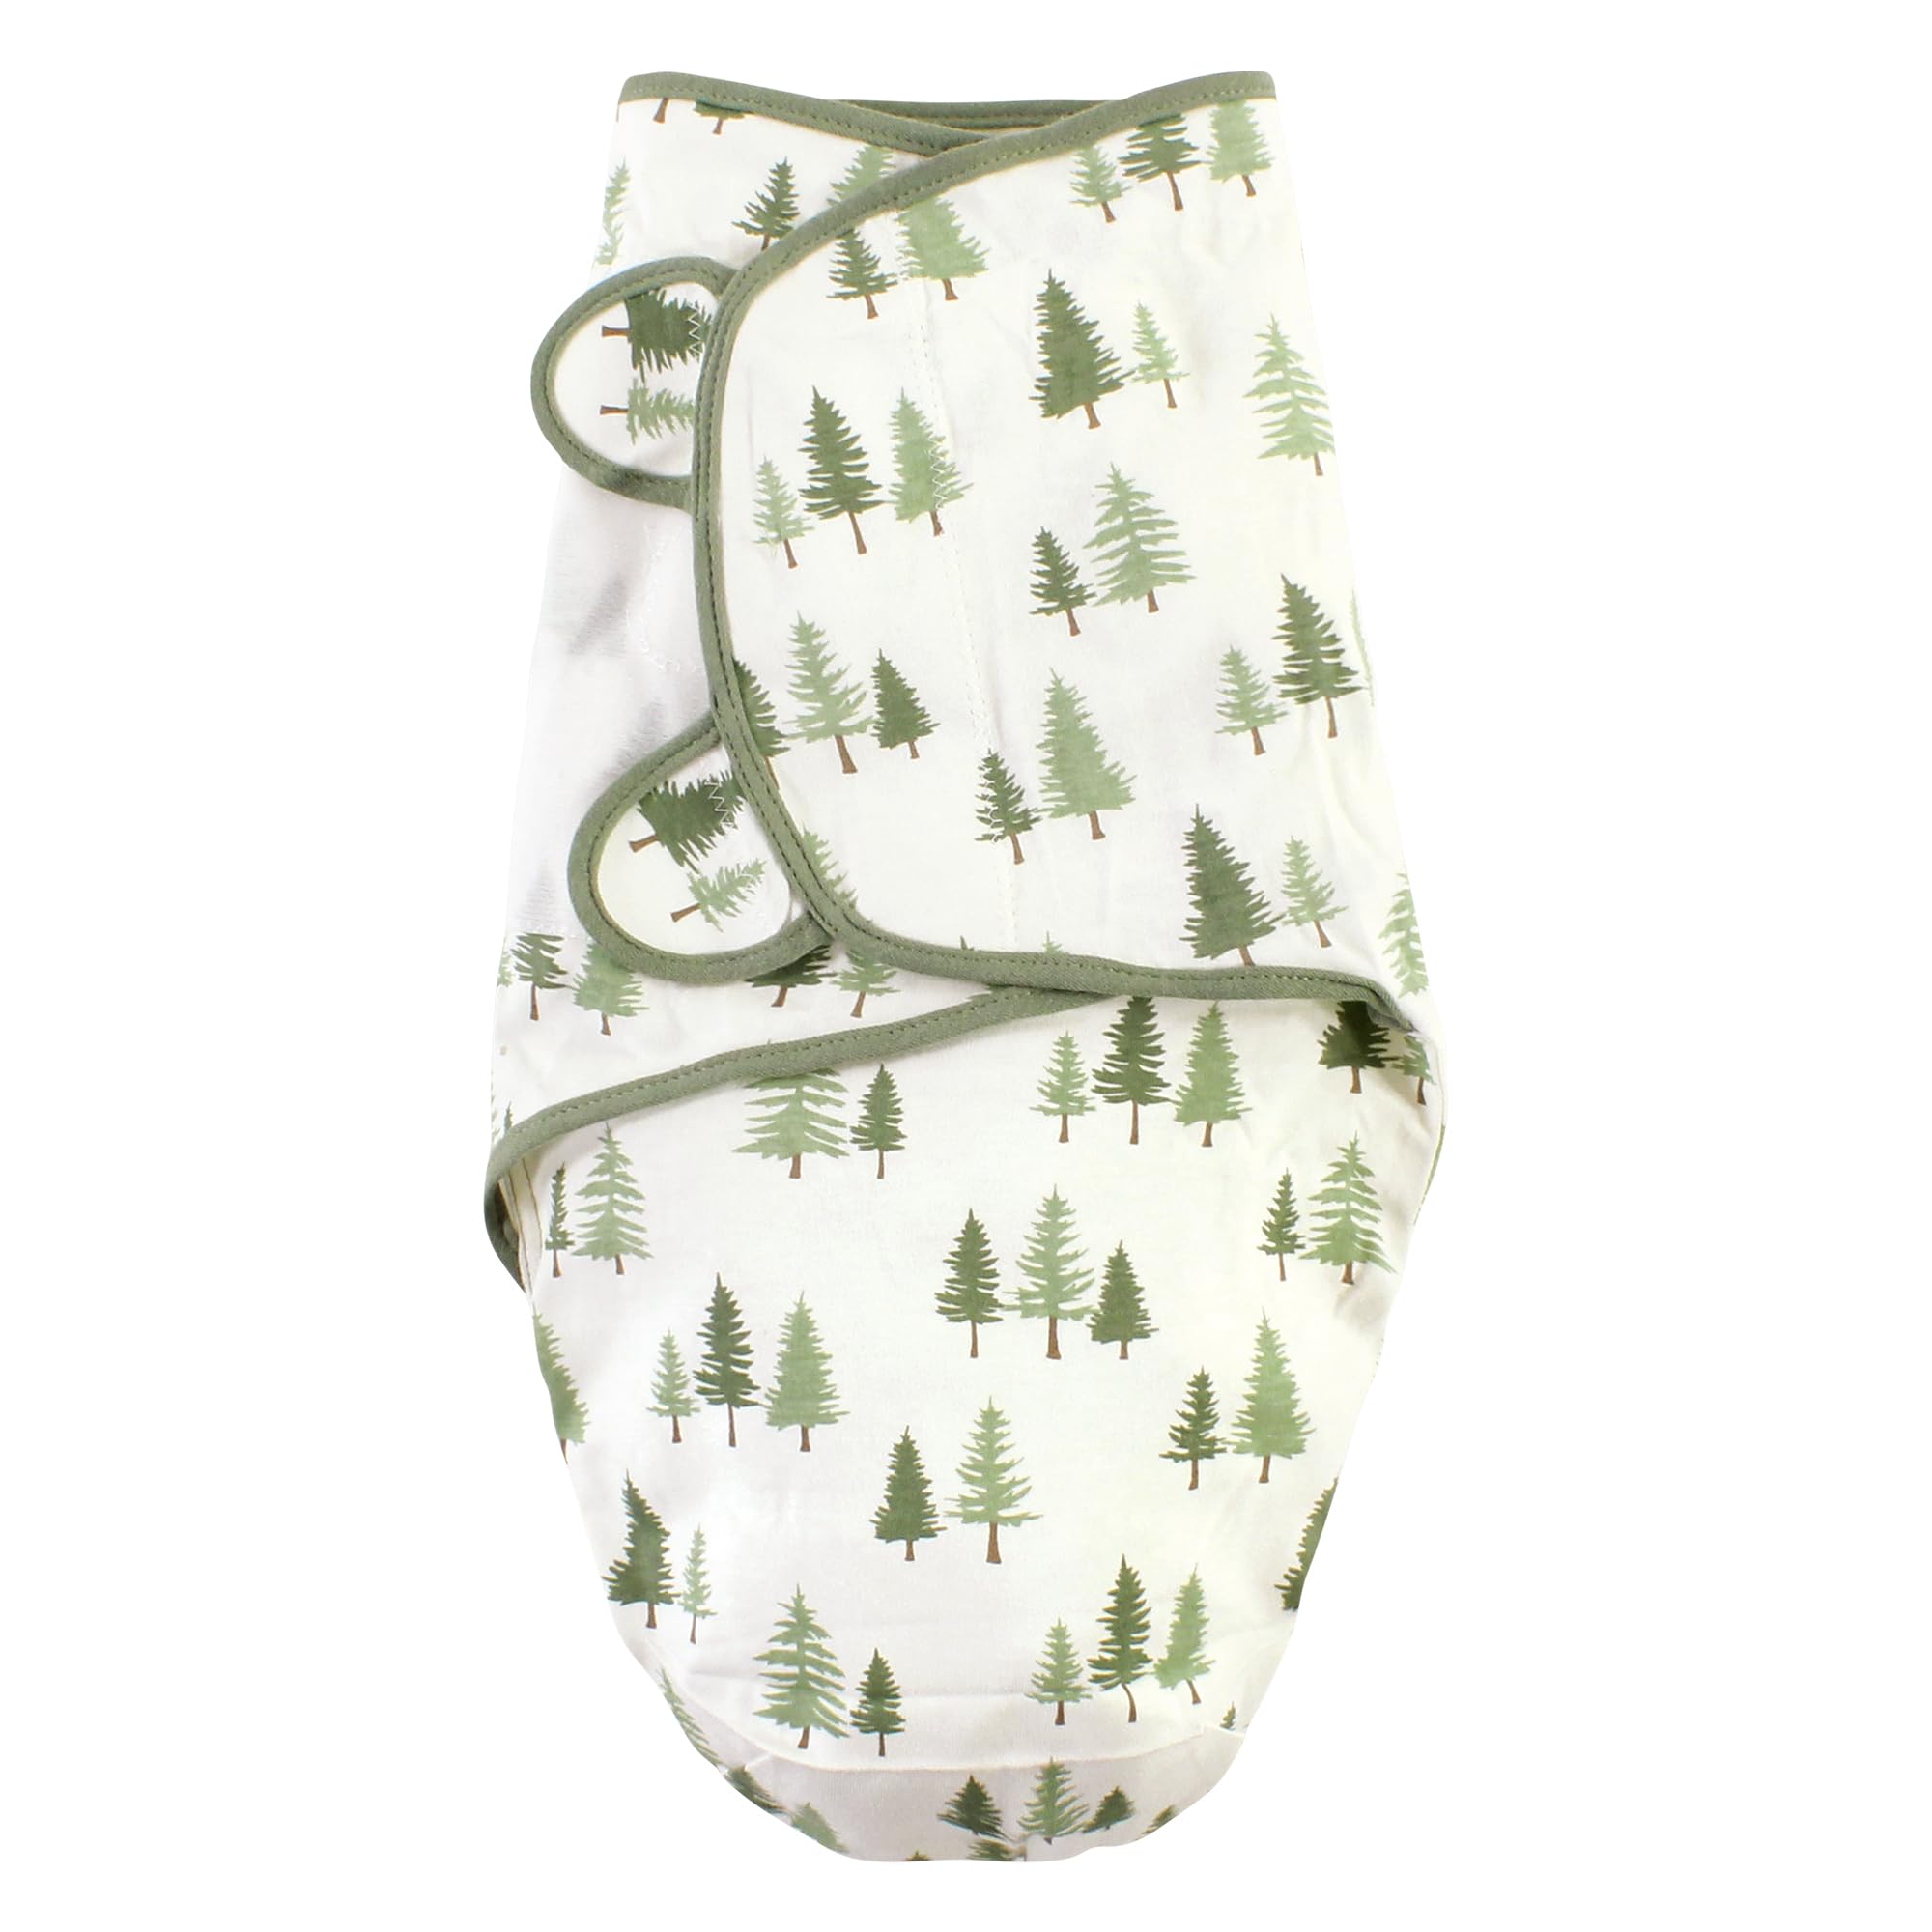 Hudson Baby Unisex Baby Cotton Swaddle Wrap, Forest Animals, 0-3 Months